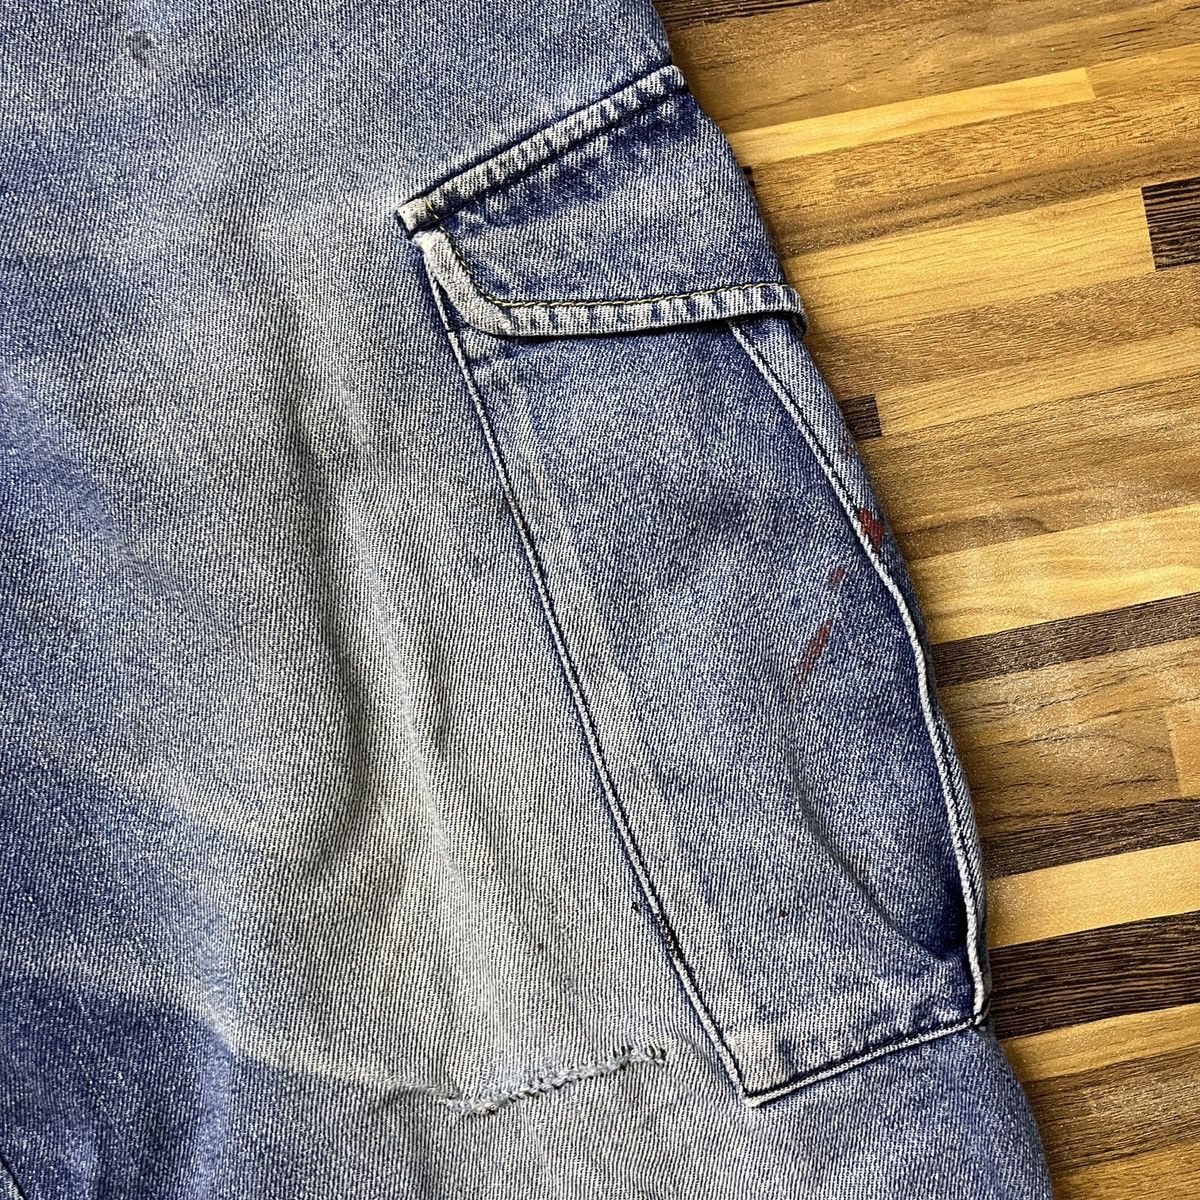 Distressed Denim - Worn Even River Japanese Cargo Denim Ripped Baggy Style - 12